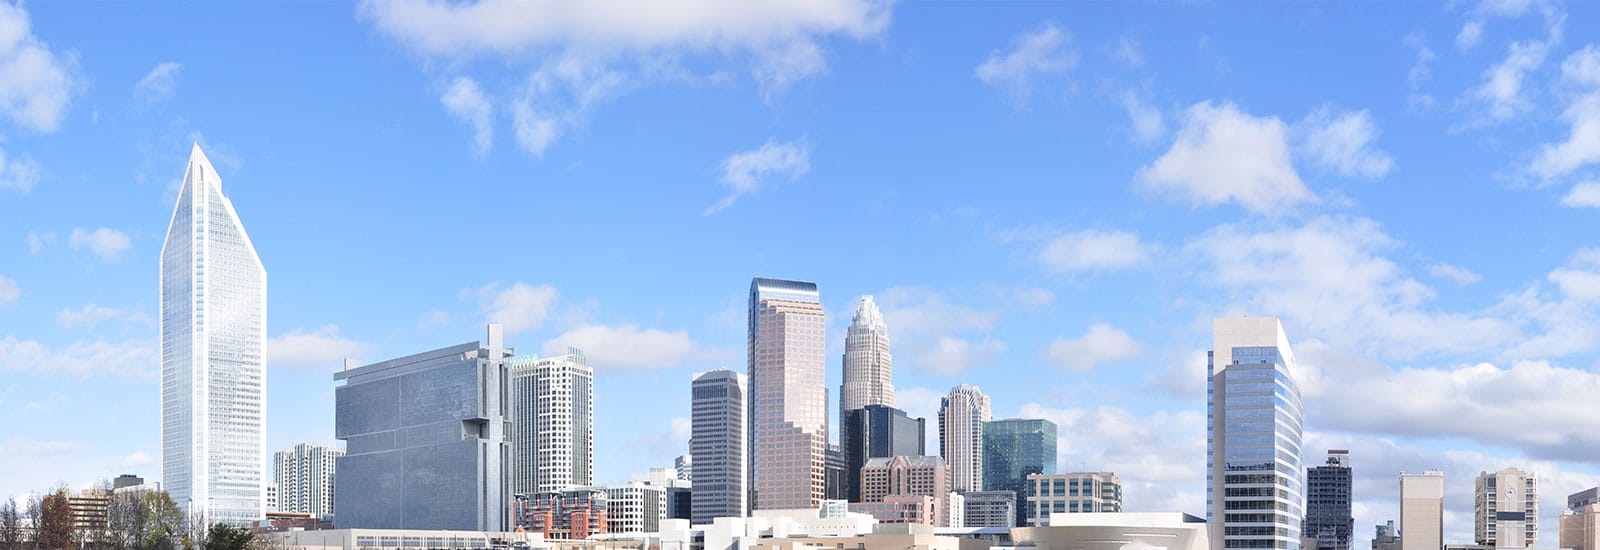 Charlotte Commercial Real Estate Services